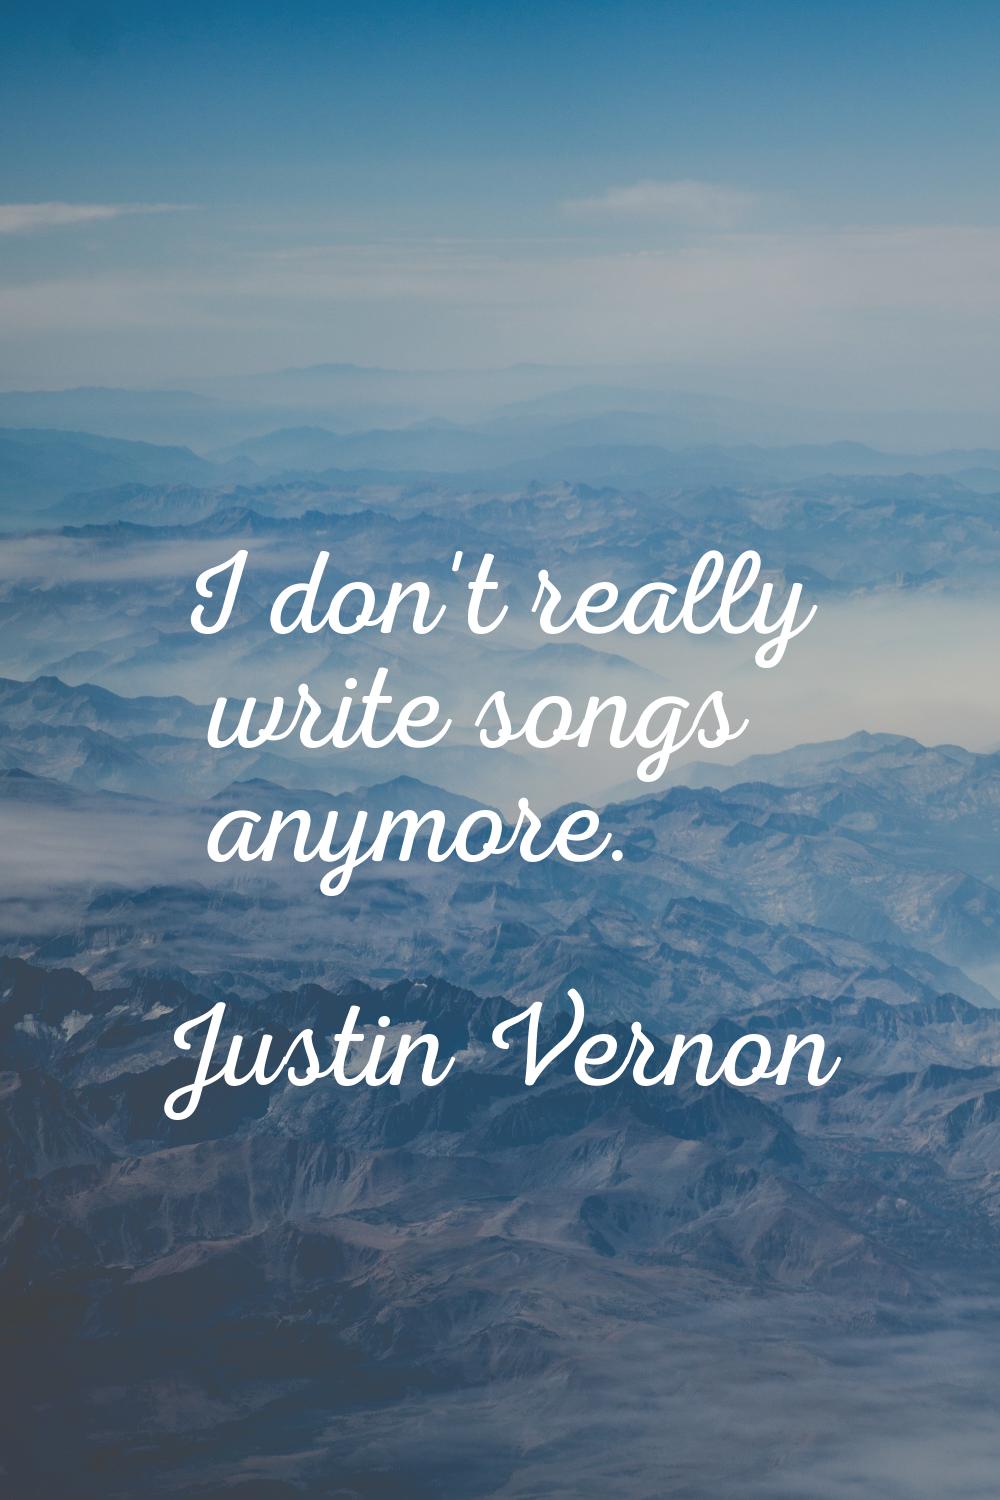 I don't really write songs anymore.